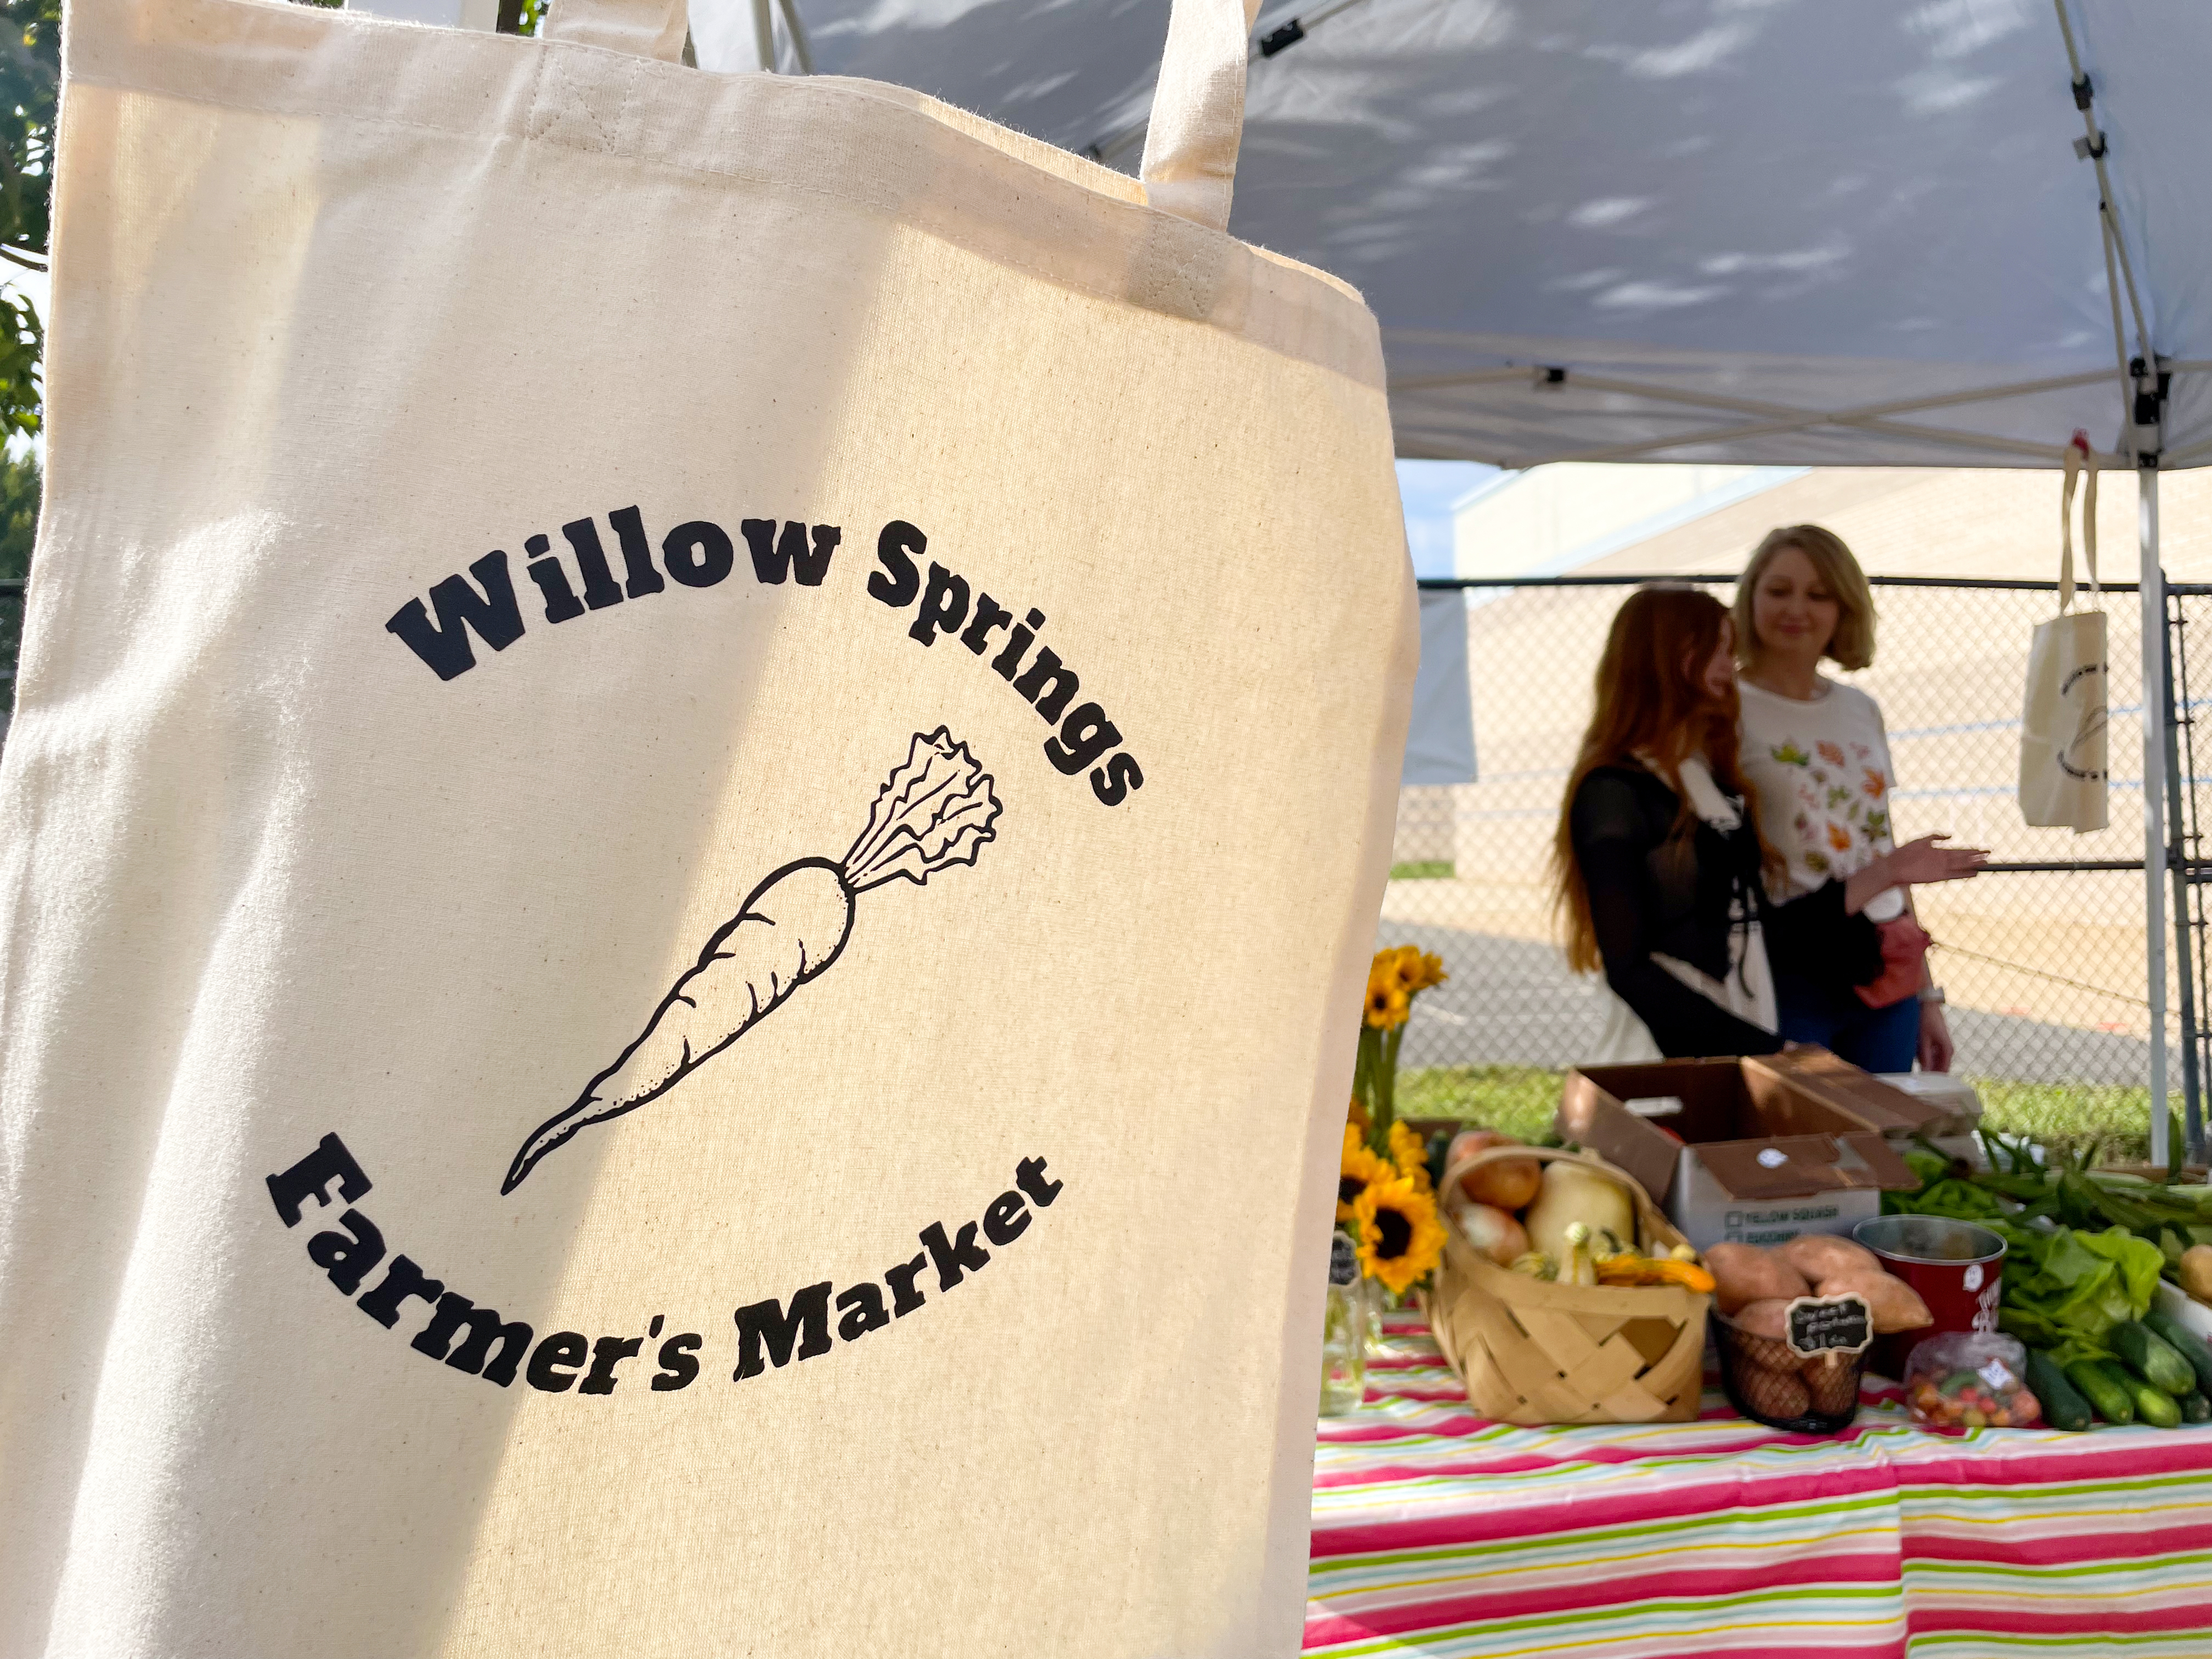 The farmers market at Willow Springs Elementary School operates every Friday into November.